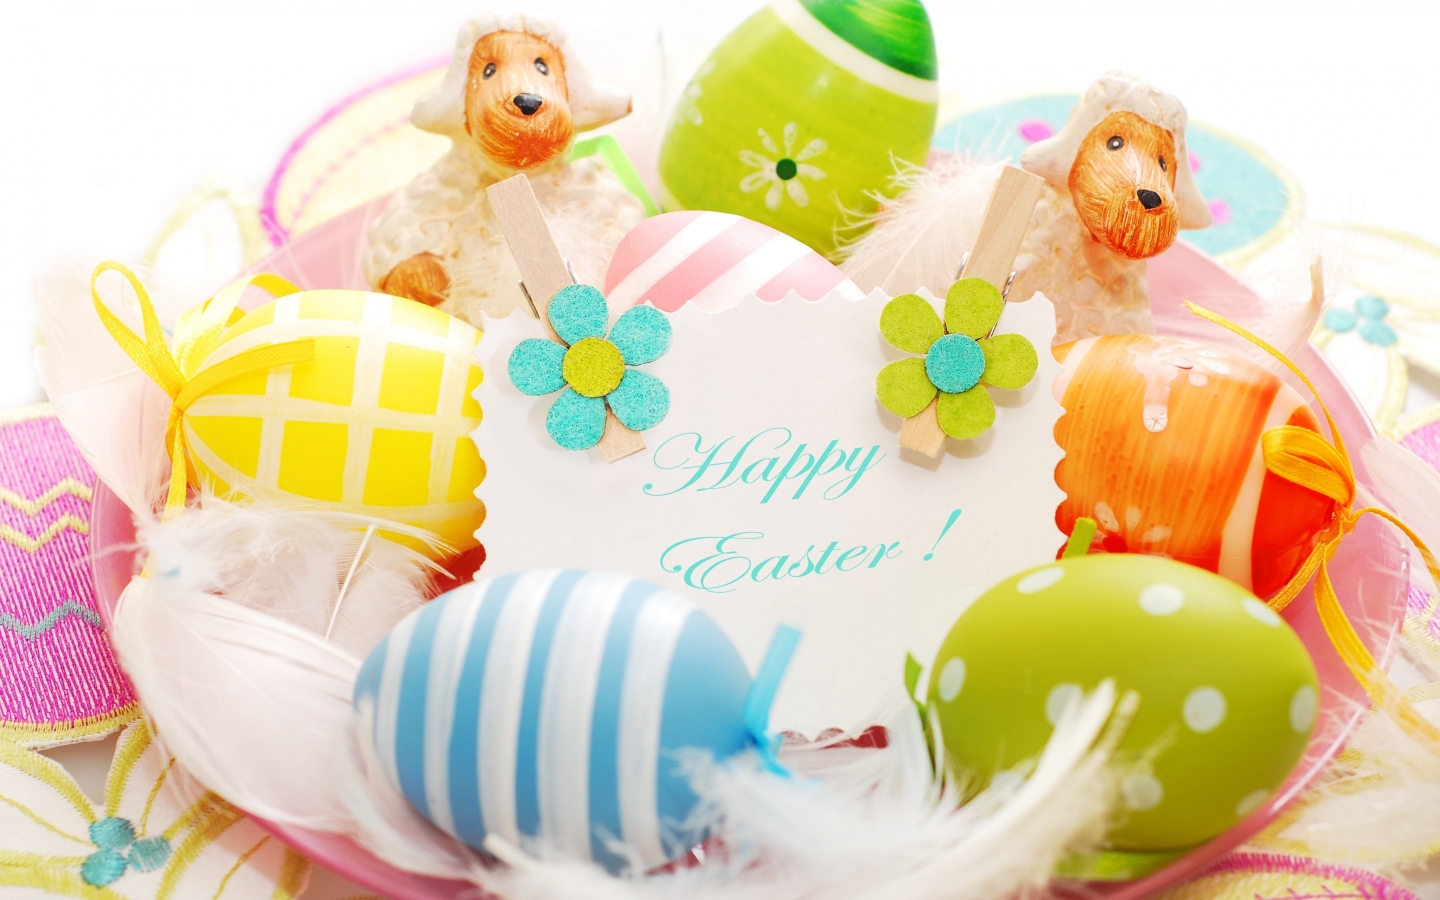 2014 Happy Easter Decorations for 1440 x 900 widescreen resolution